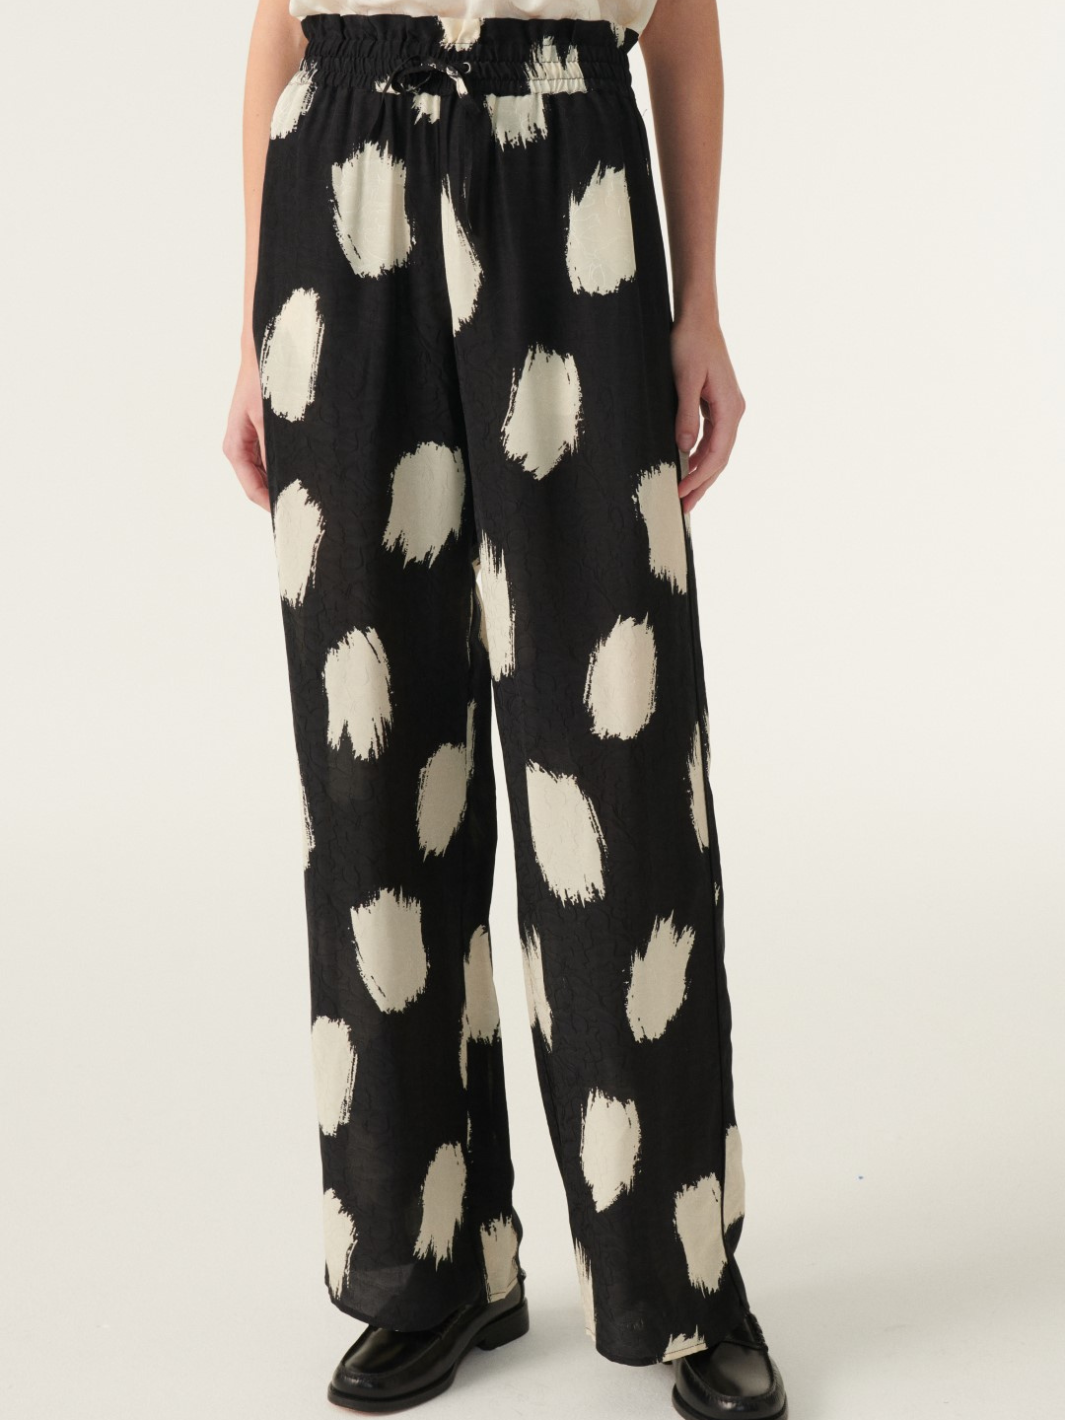 MIAMI FLOWING PANTS IN BLACK - Romi Boutique